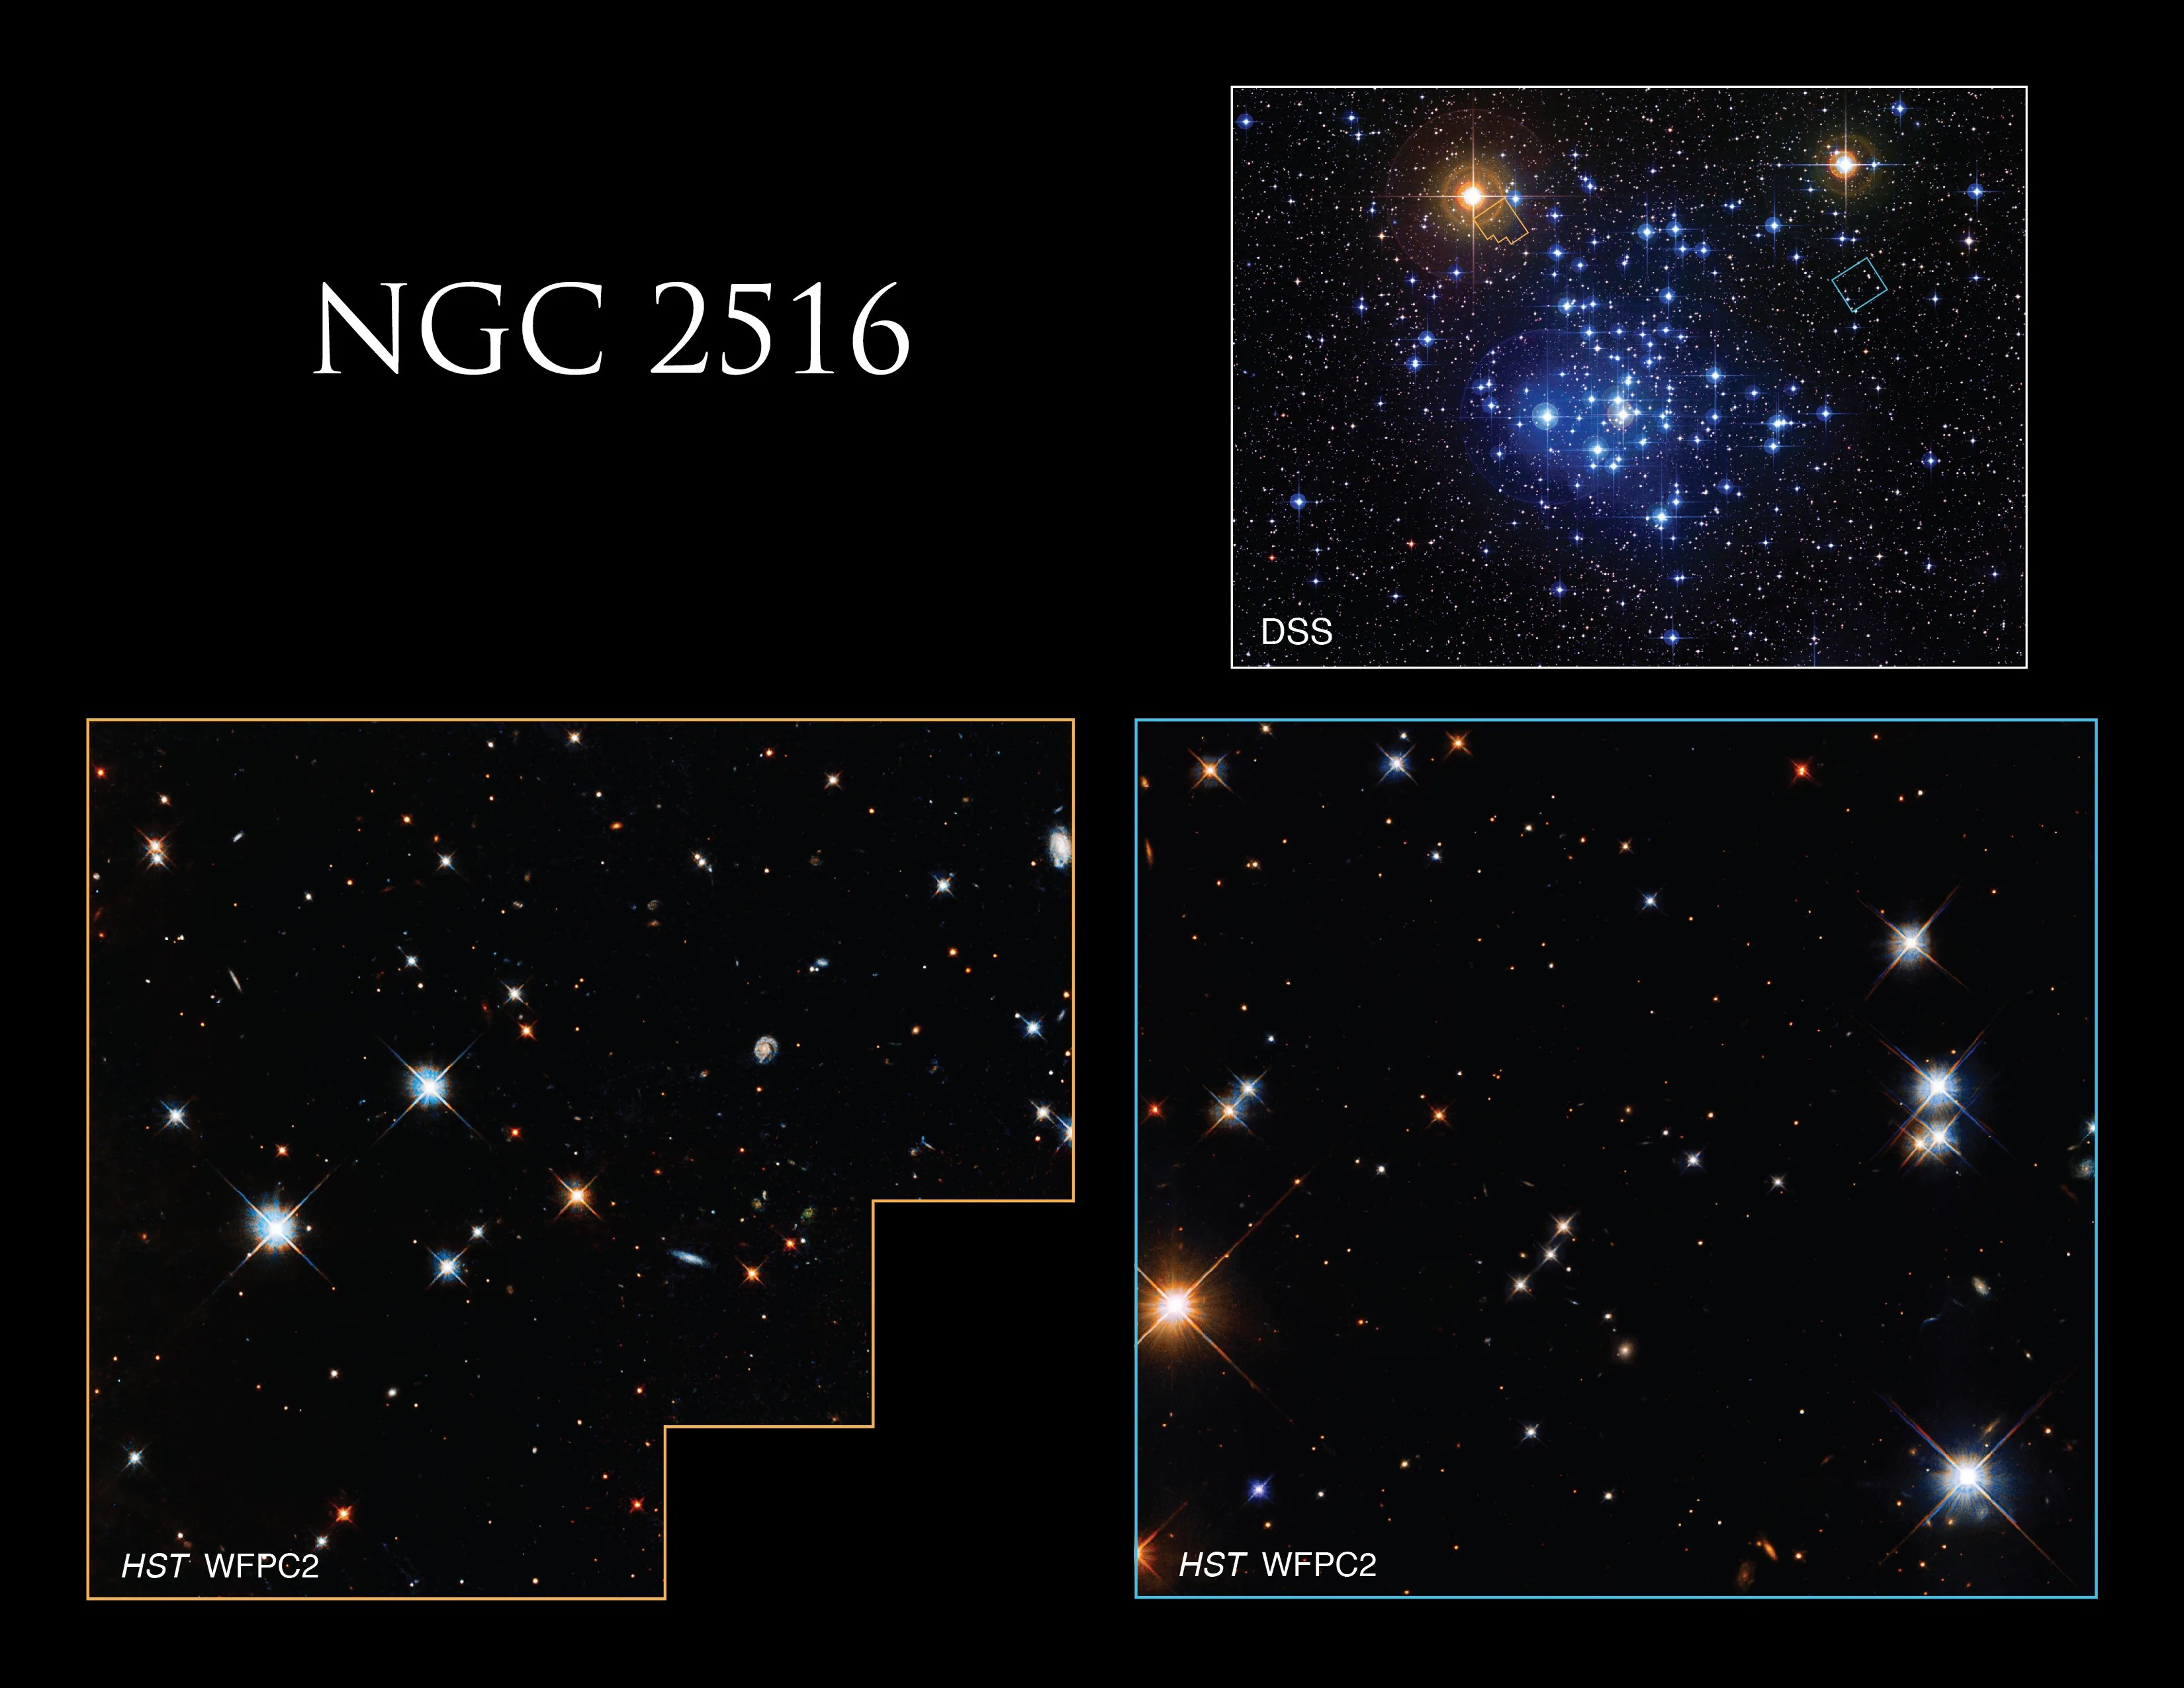 The first image shows a more distant image of the cluster, filled with blue stars. The next two images show Hubble closeups of some of the individual stars.